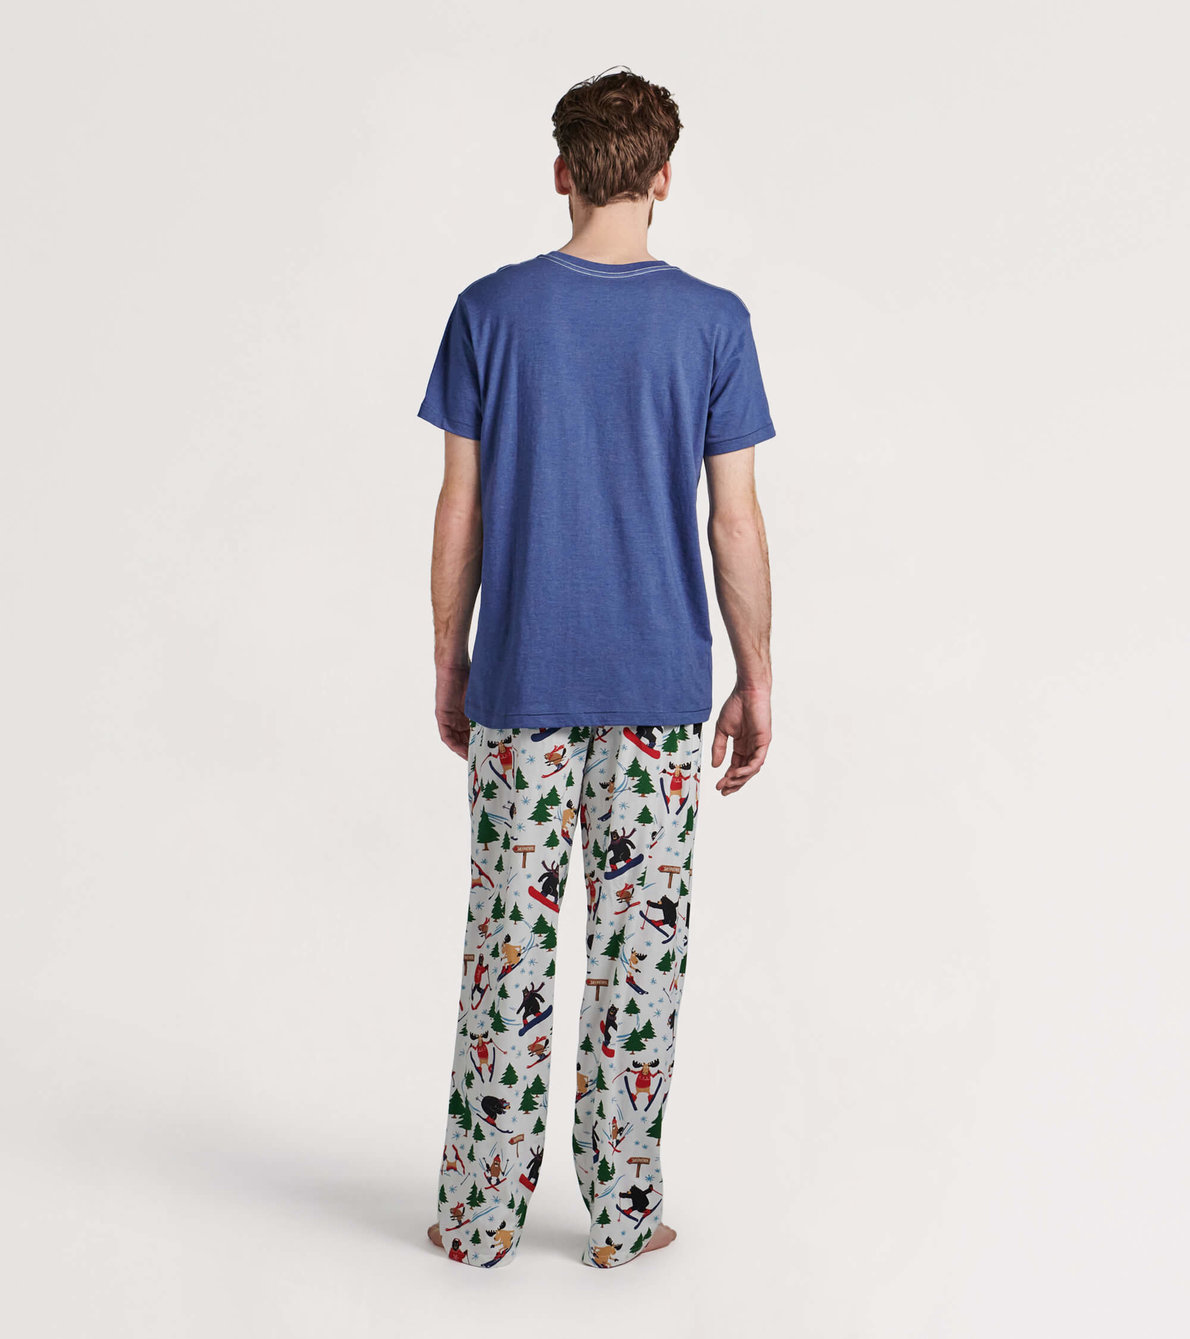 View larger image of Men's Wild About Skiing Jersey Pajama Pants